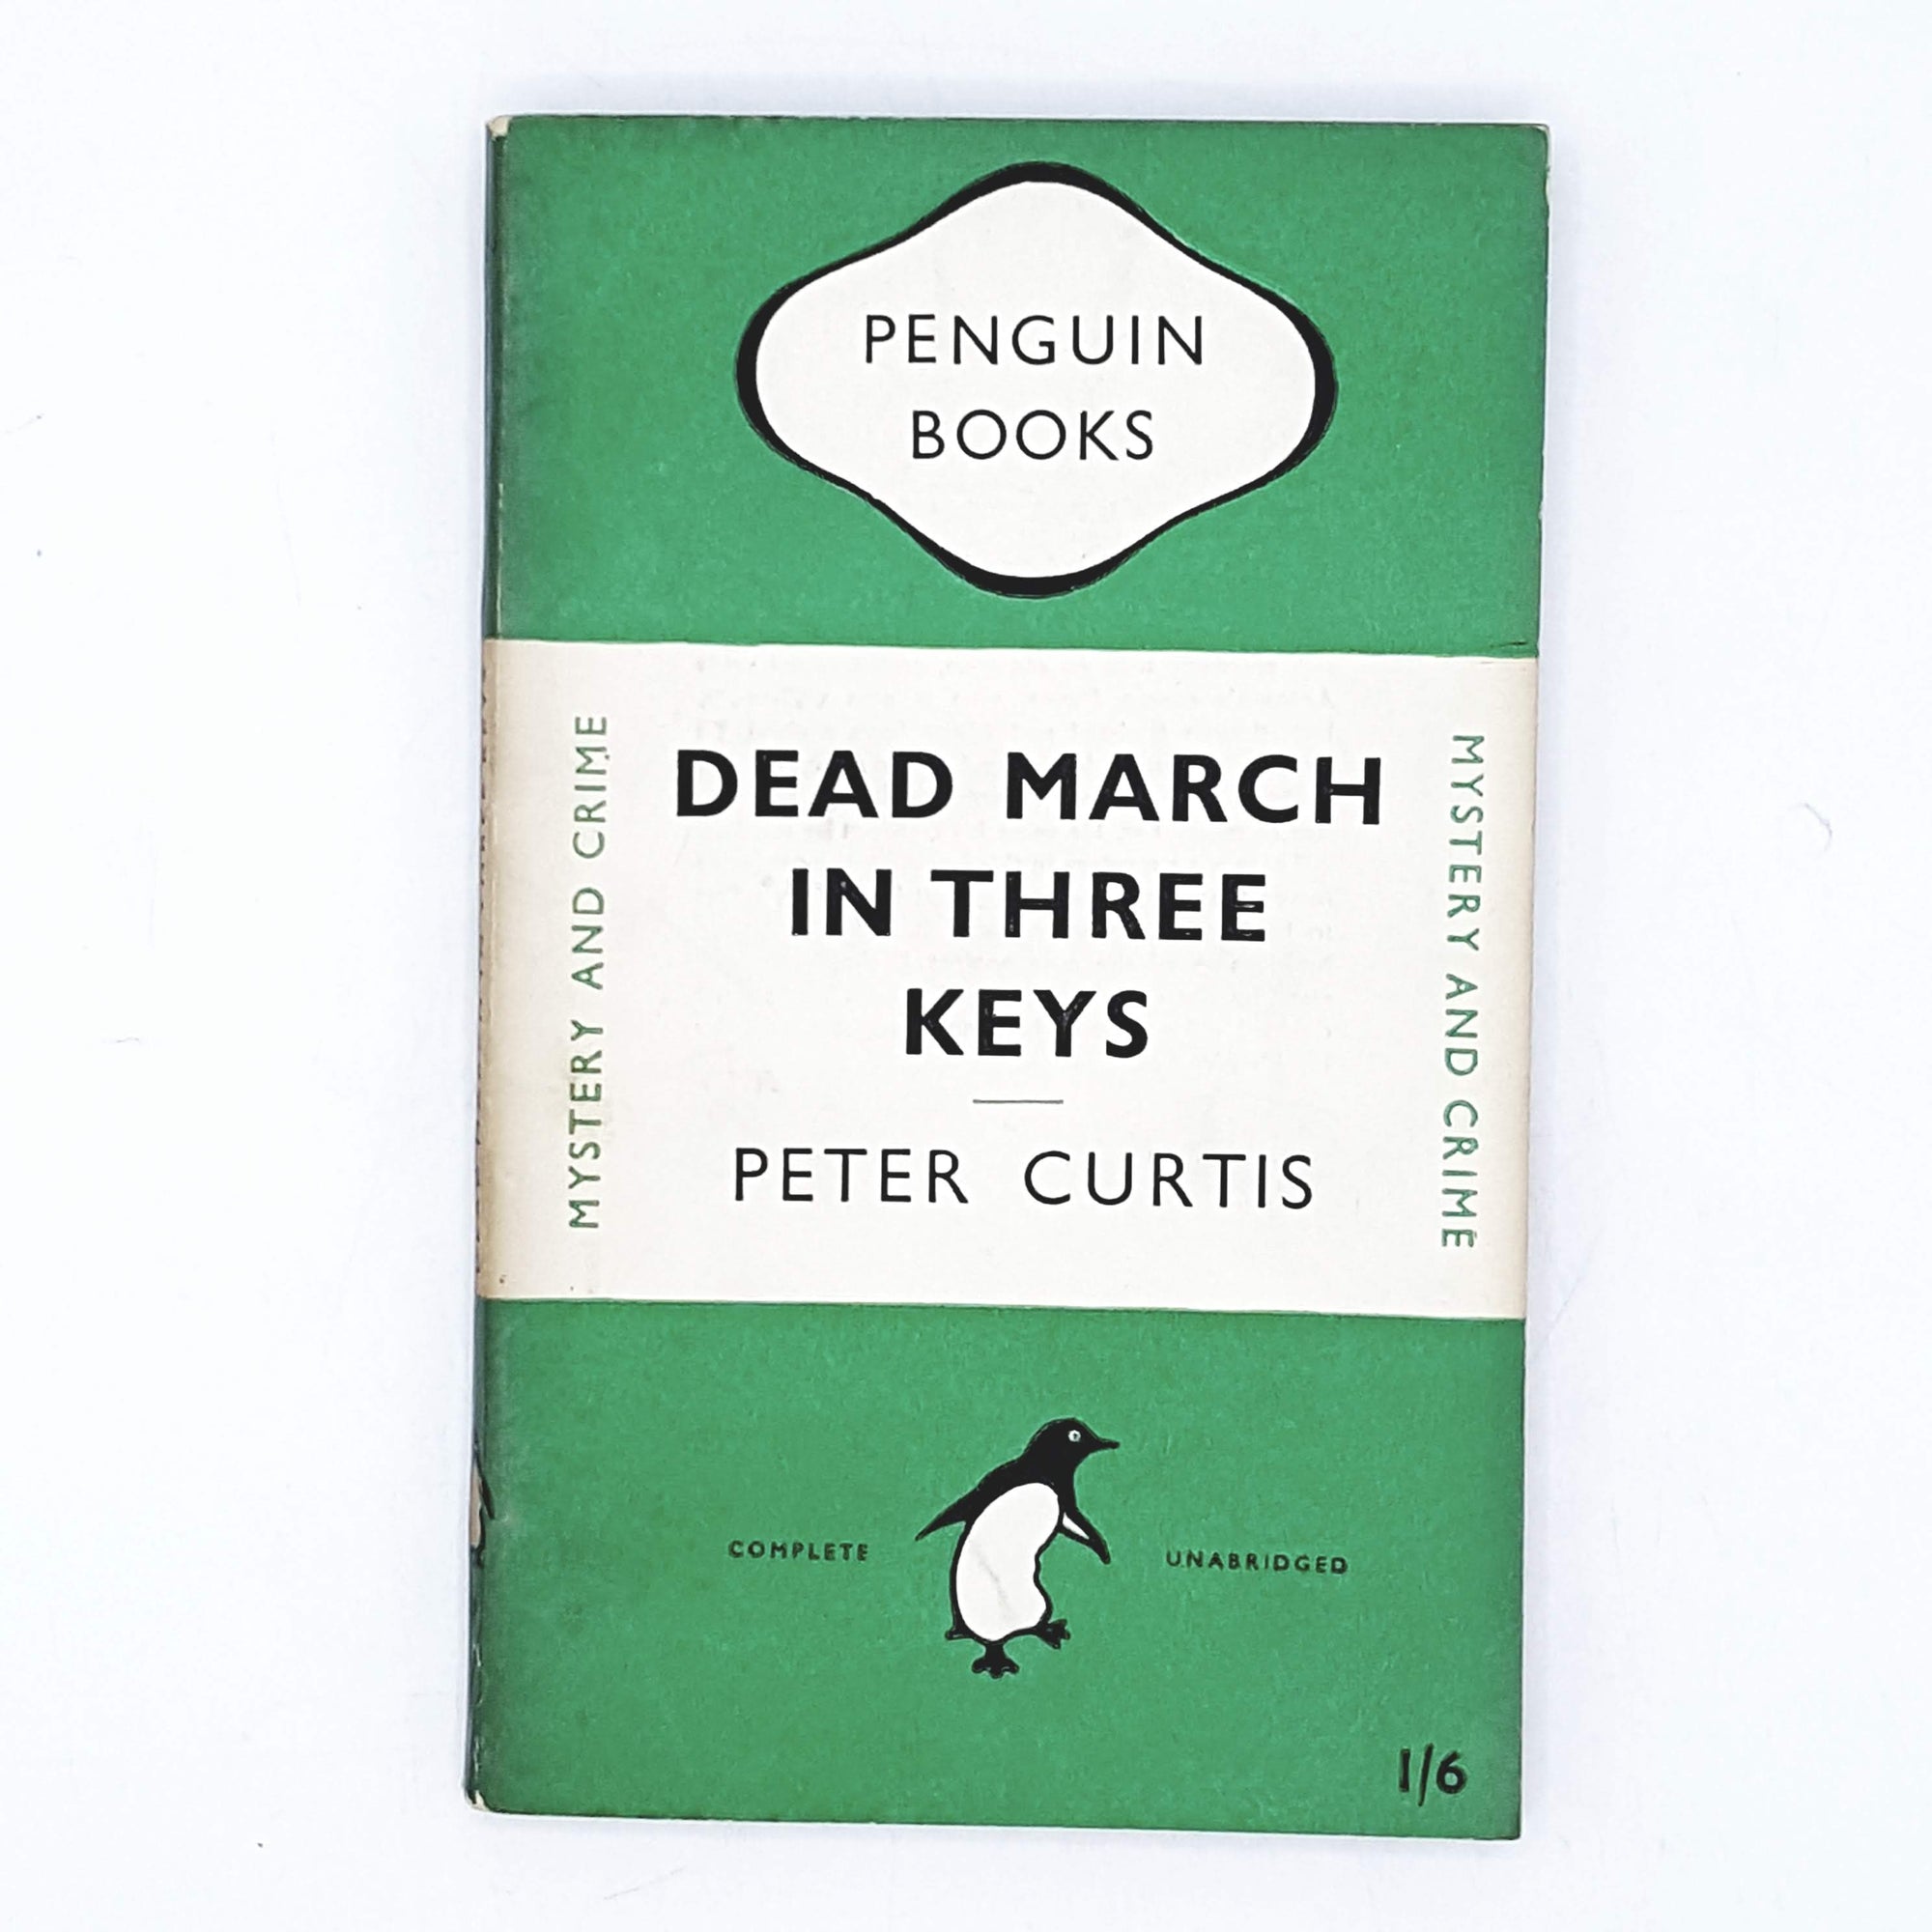 Dead March in Three Keys by Peter Curtis 1949